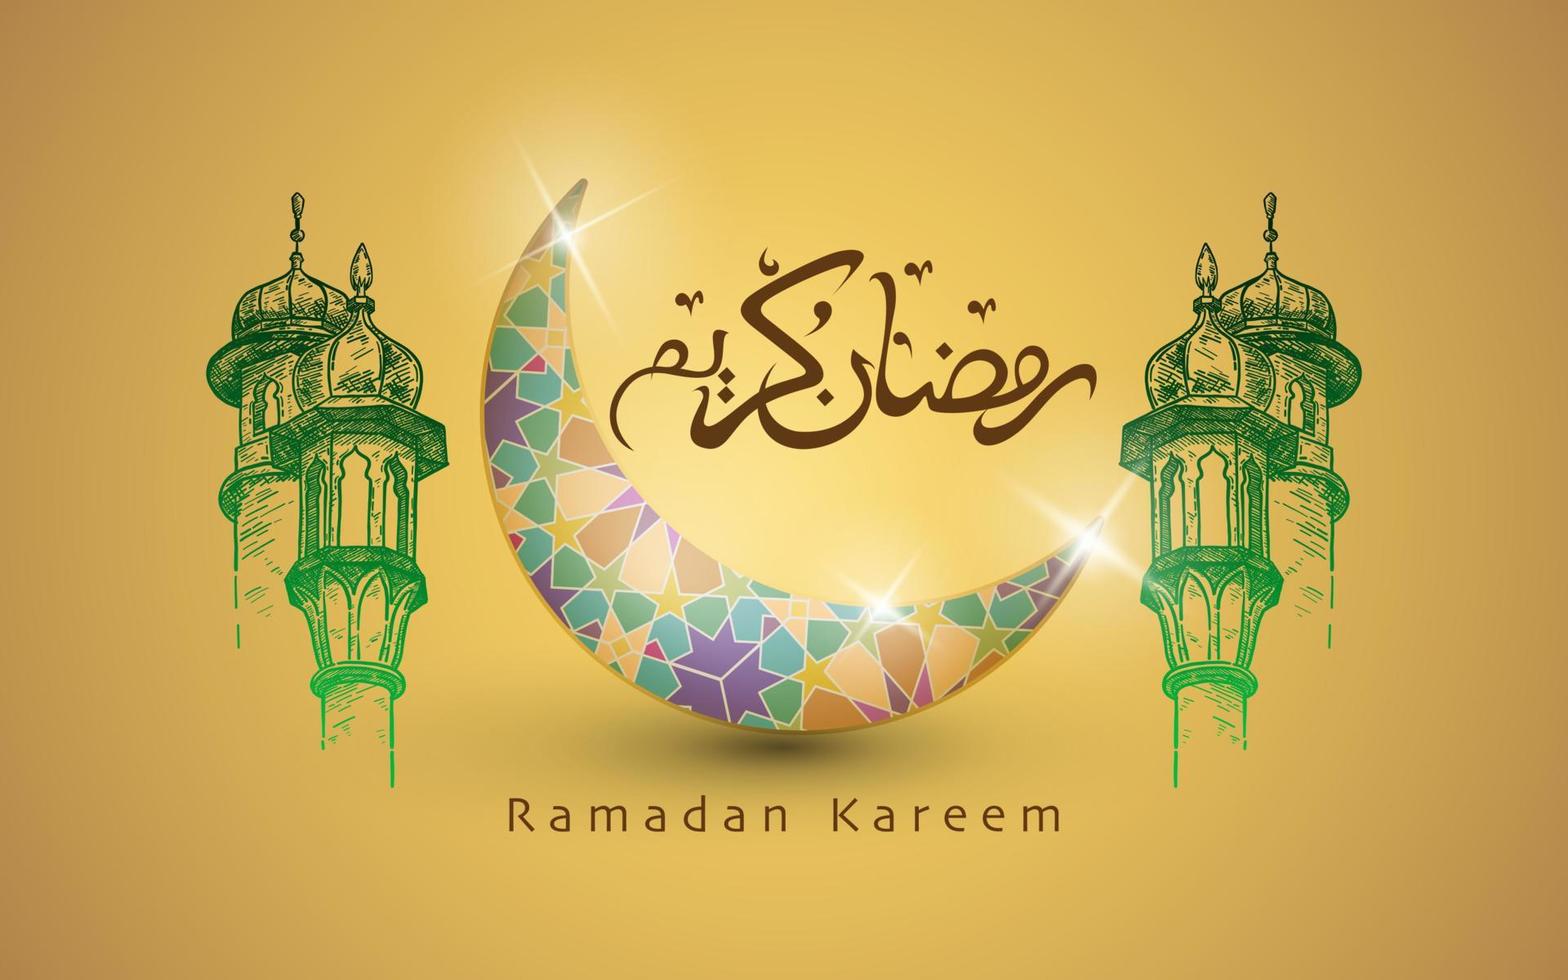 Ramadan Kareem Islamic Design With Hand Drawn Calligraphies Beautiful Crescent Moon And Mosque Dome Vector